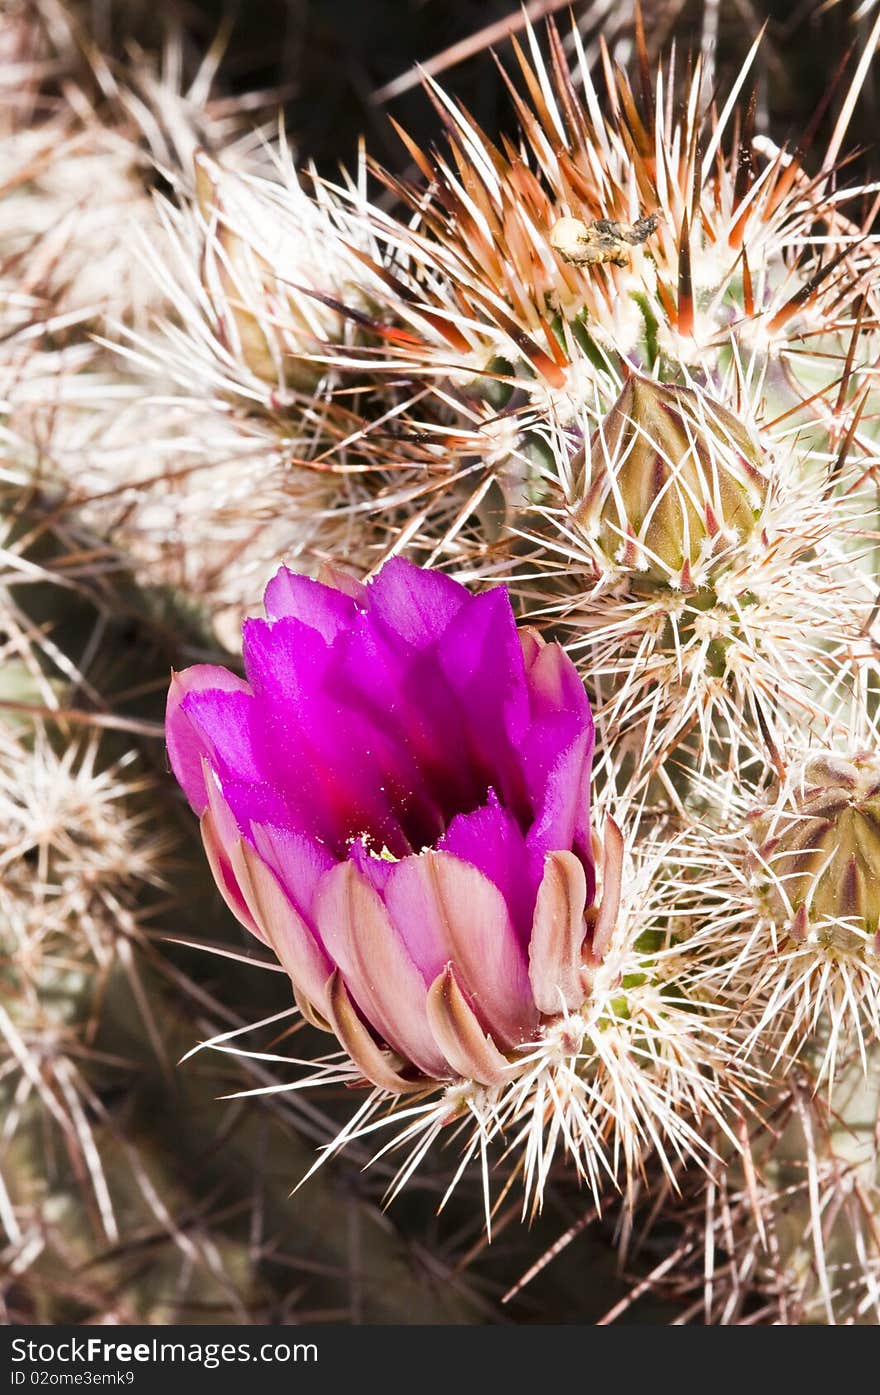 Hedgehog cactus blossoms blooming in the Sonoran Desert